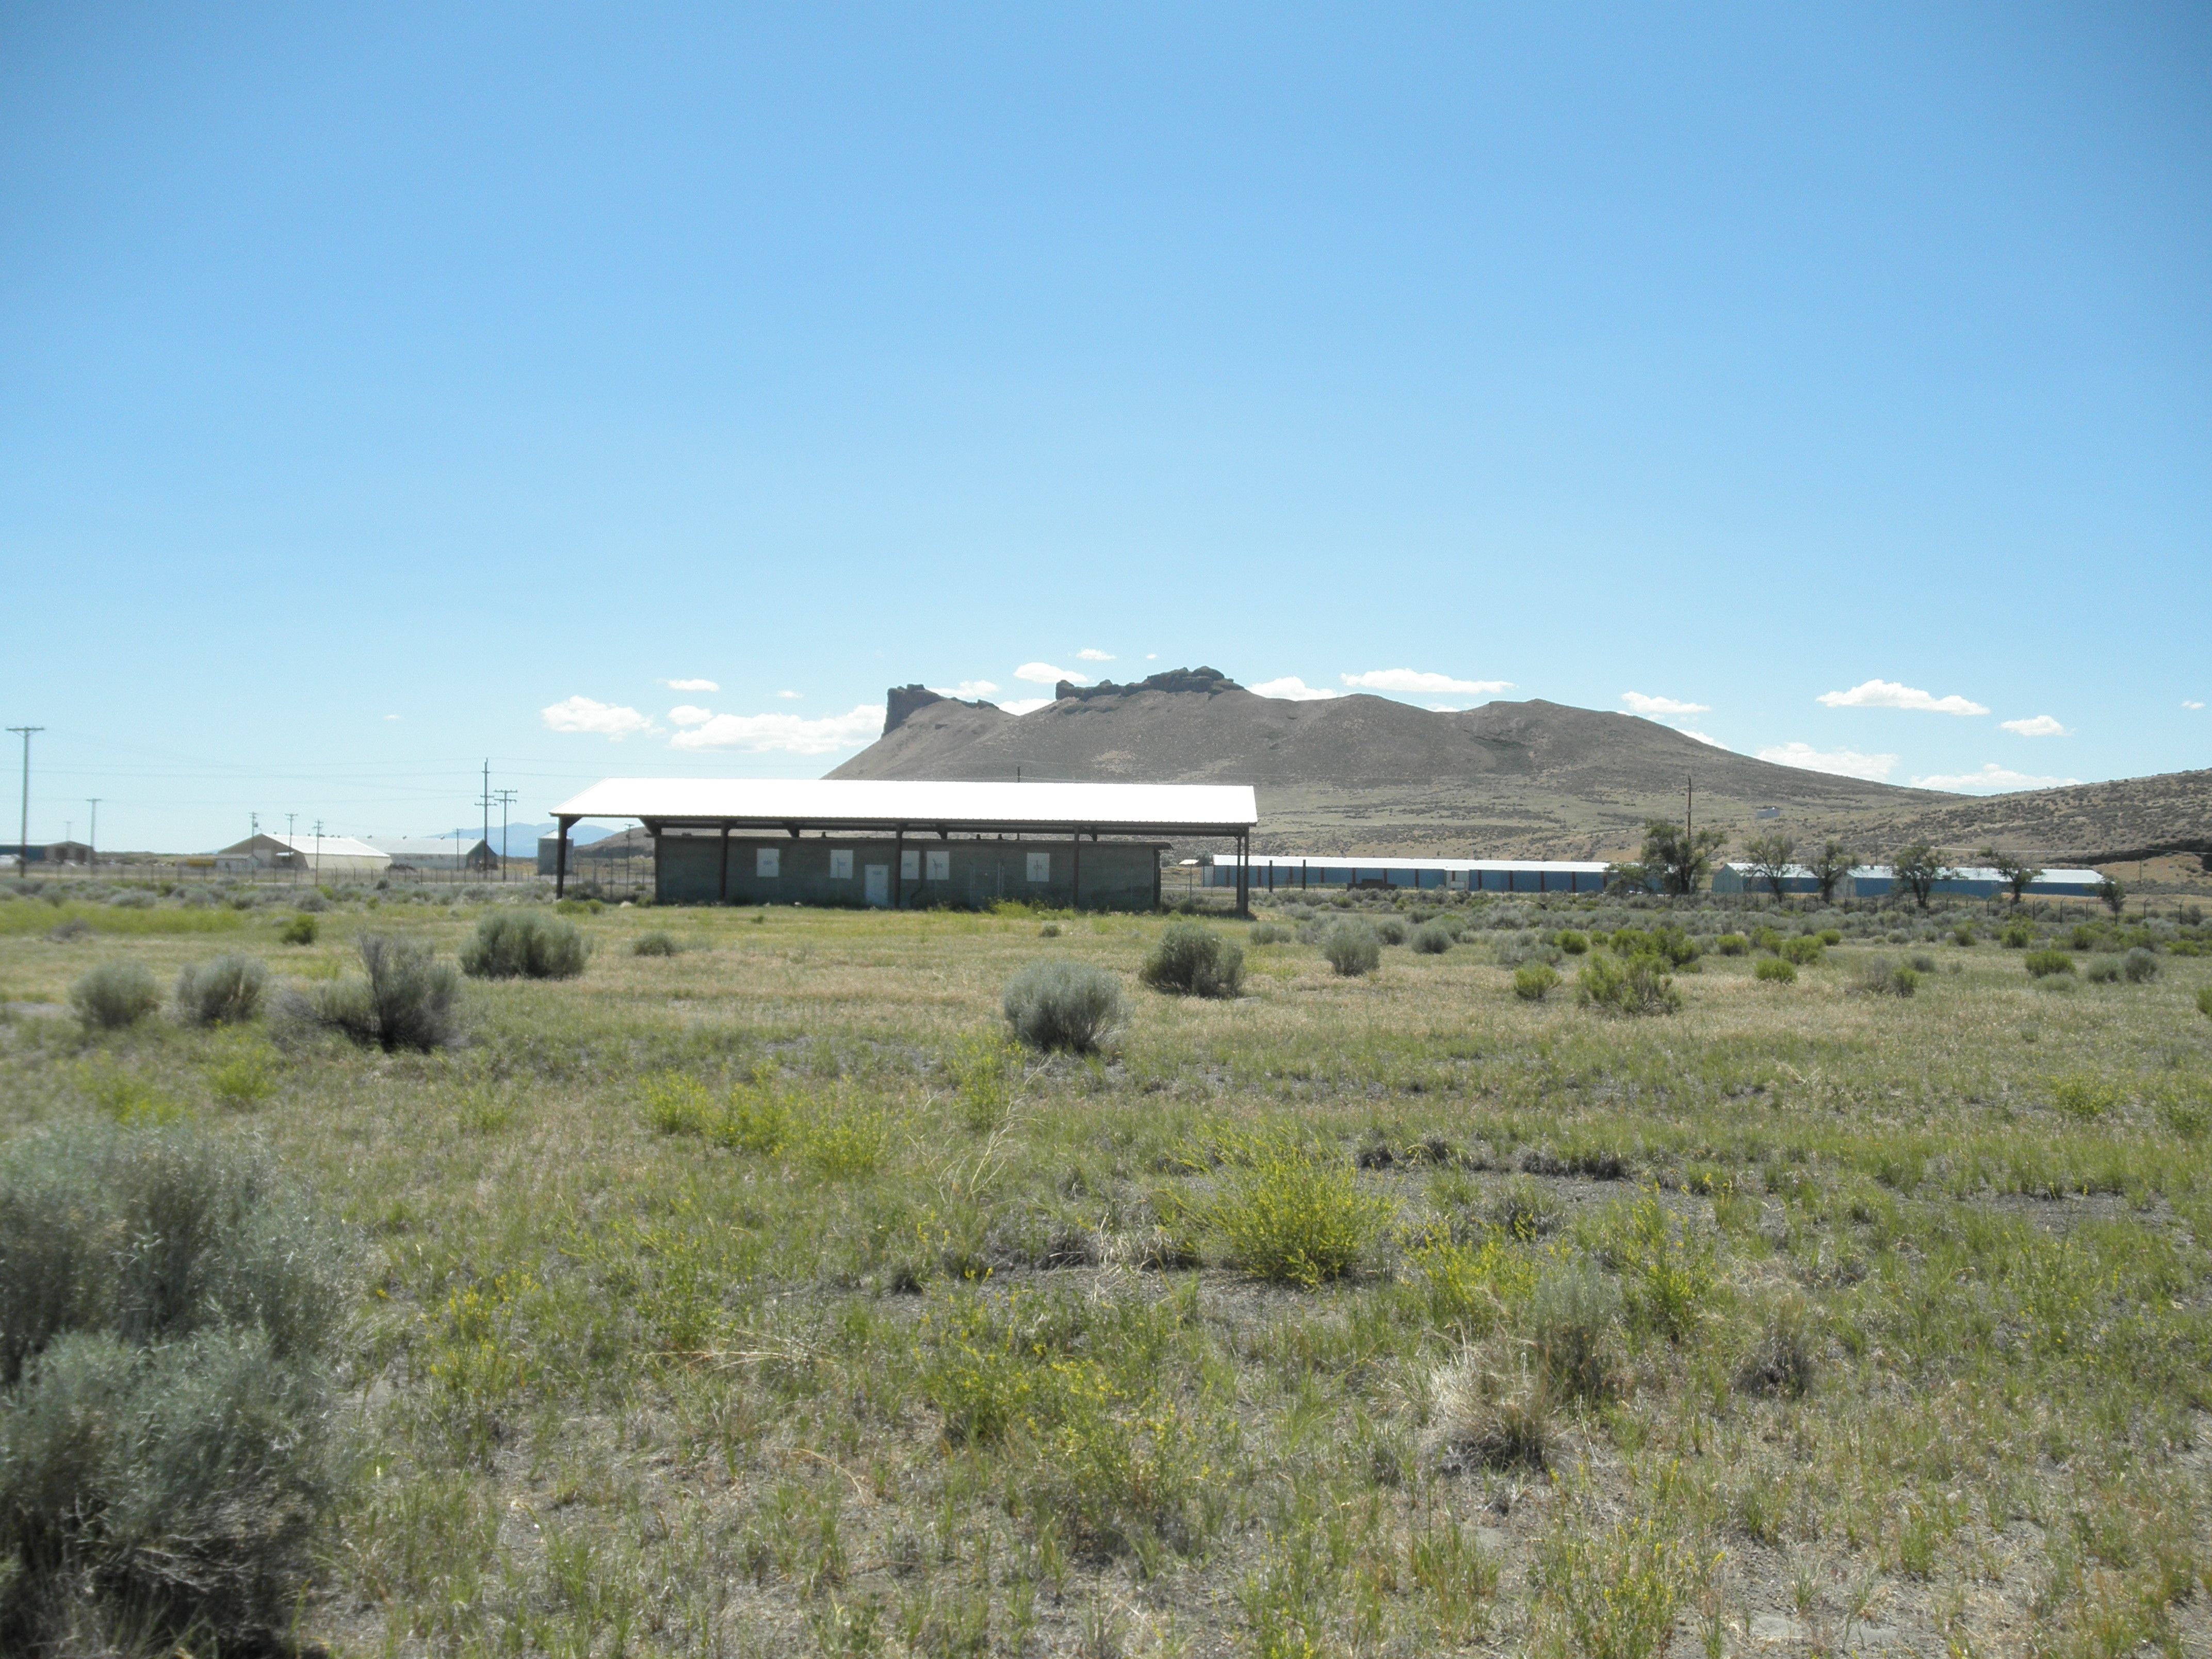 Tule Lake Segregation Center Jail with Castle Rock in the background